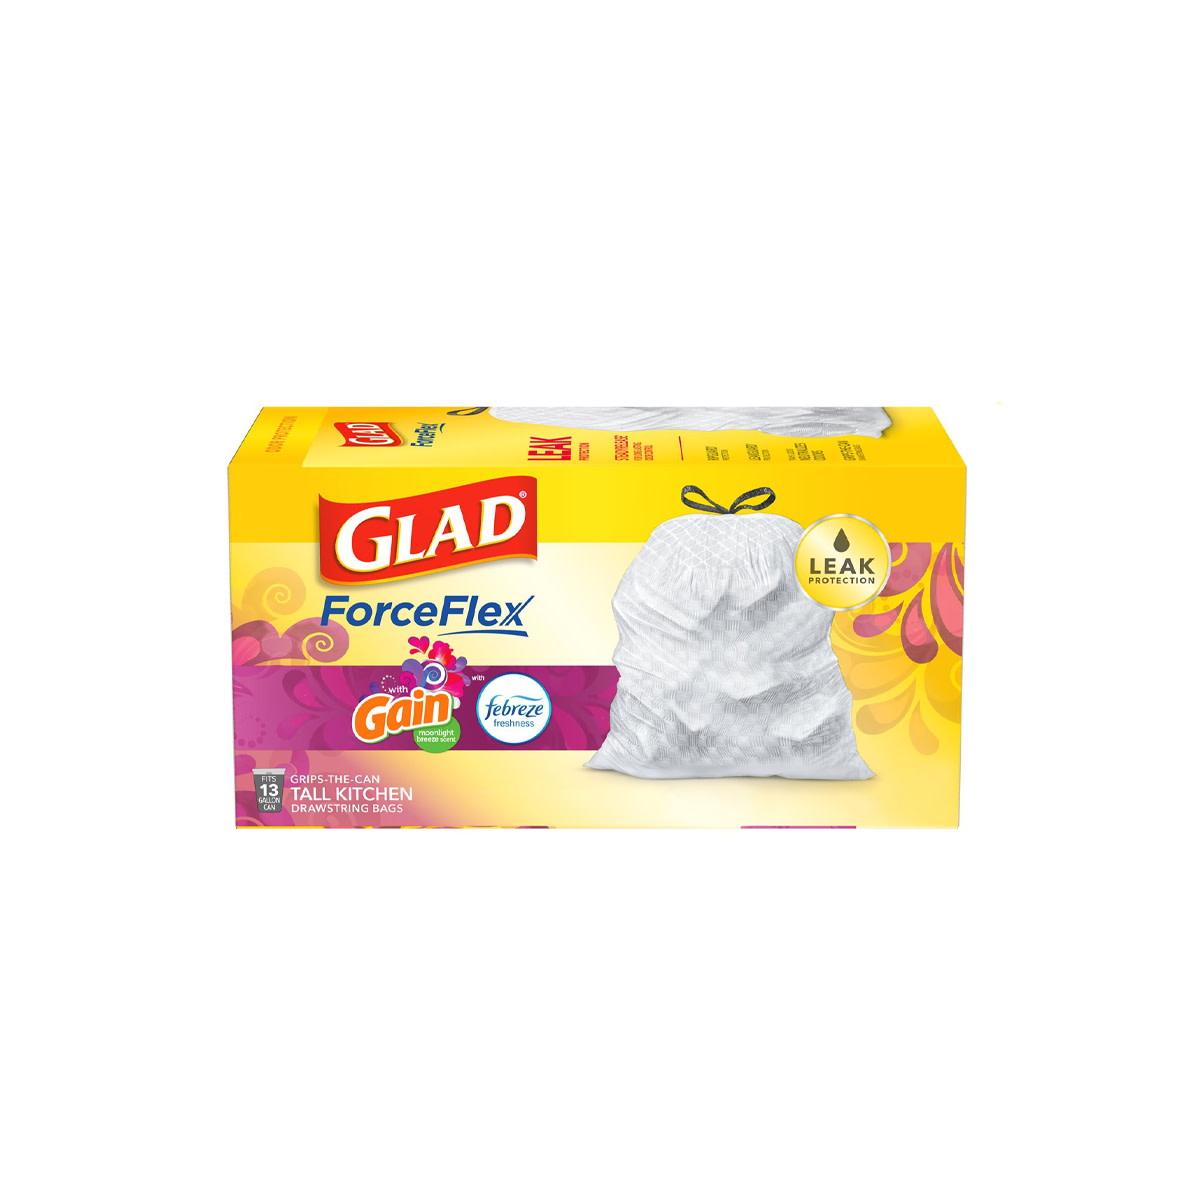 Pack of Glad® Trash Bags with the scent of Gain Moonlight Breeze